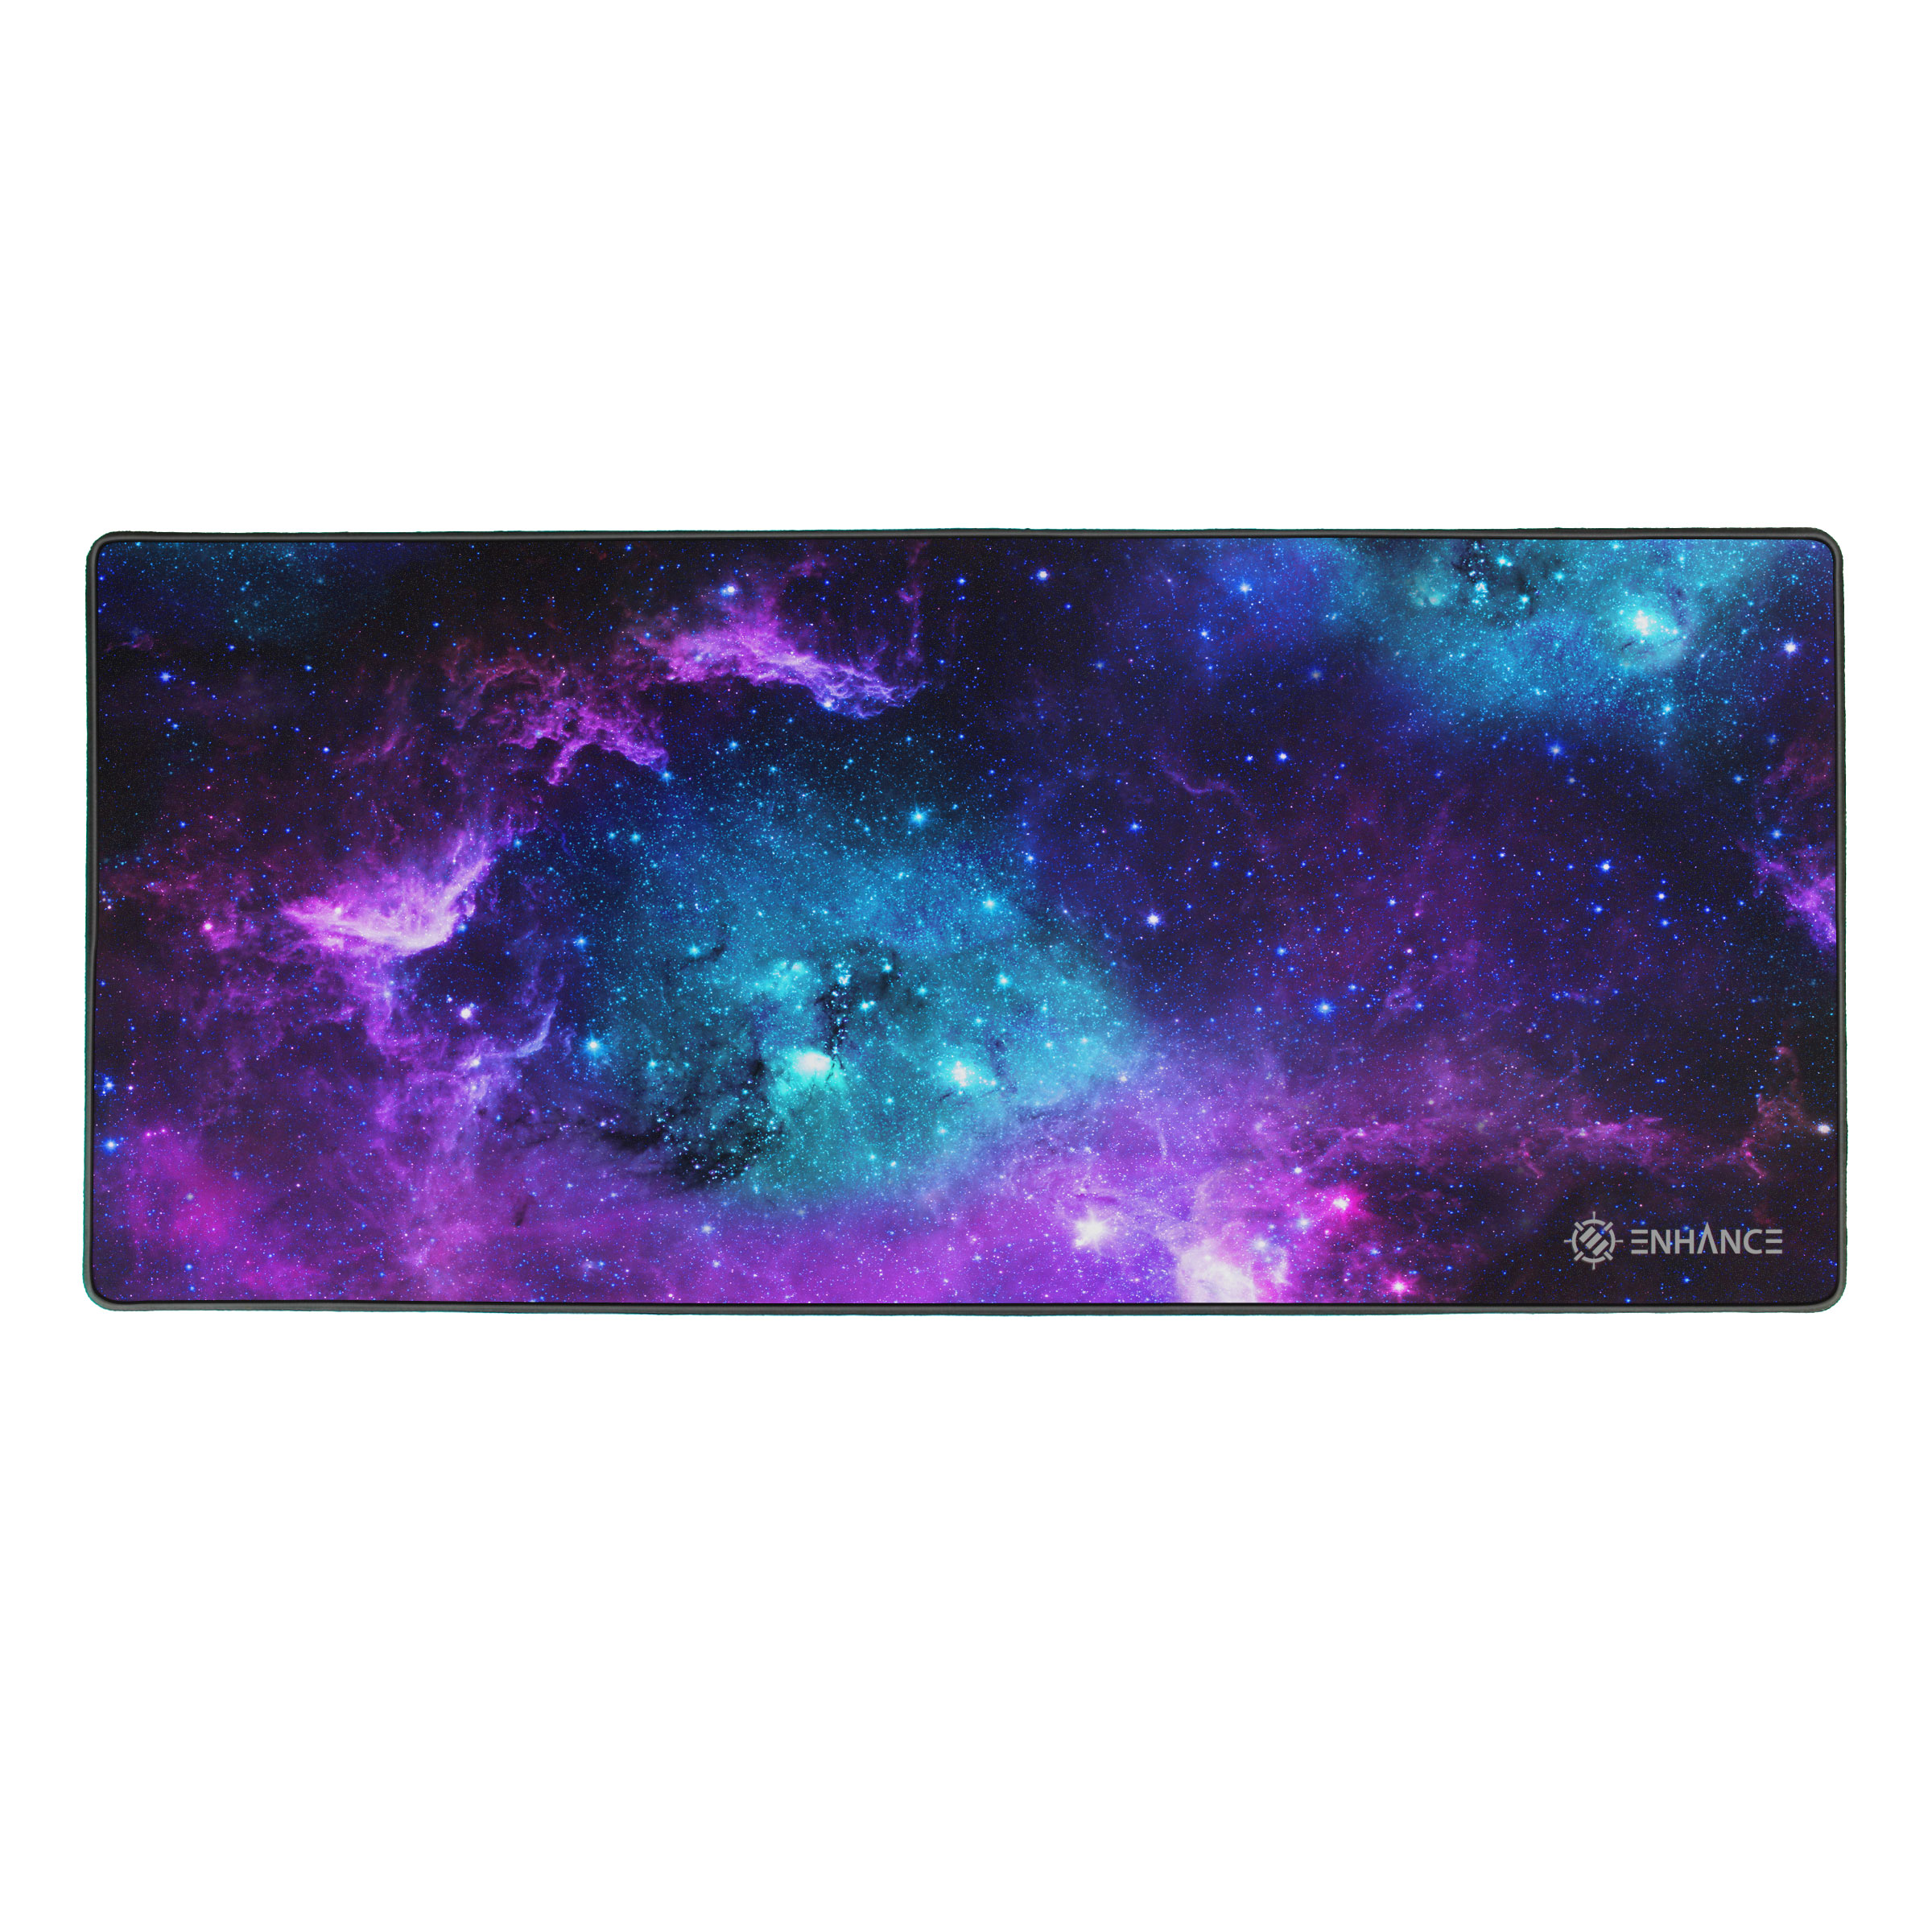 ENHANCE Extended Large Gaming Mouse Pad - XL Mouse Mat (31.5" x 13.75") Anti-Fray Stitching for Professional eSports with Low-Friction Tracking Surface and Non-Slip Backing - Galaxy - image 1 of 8